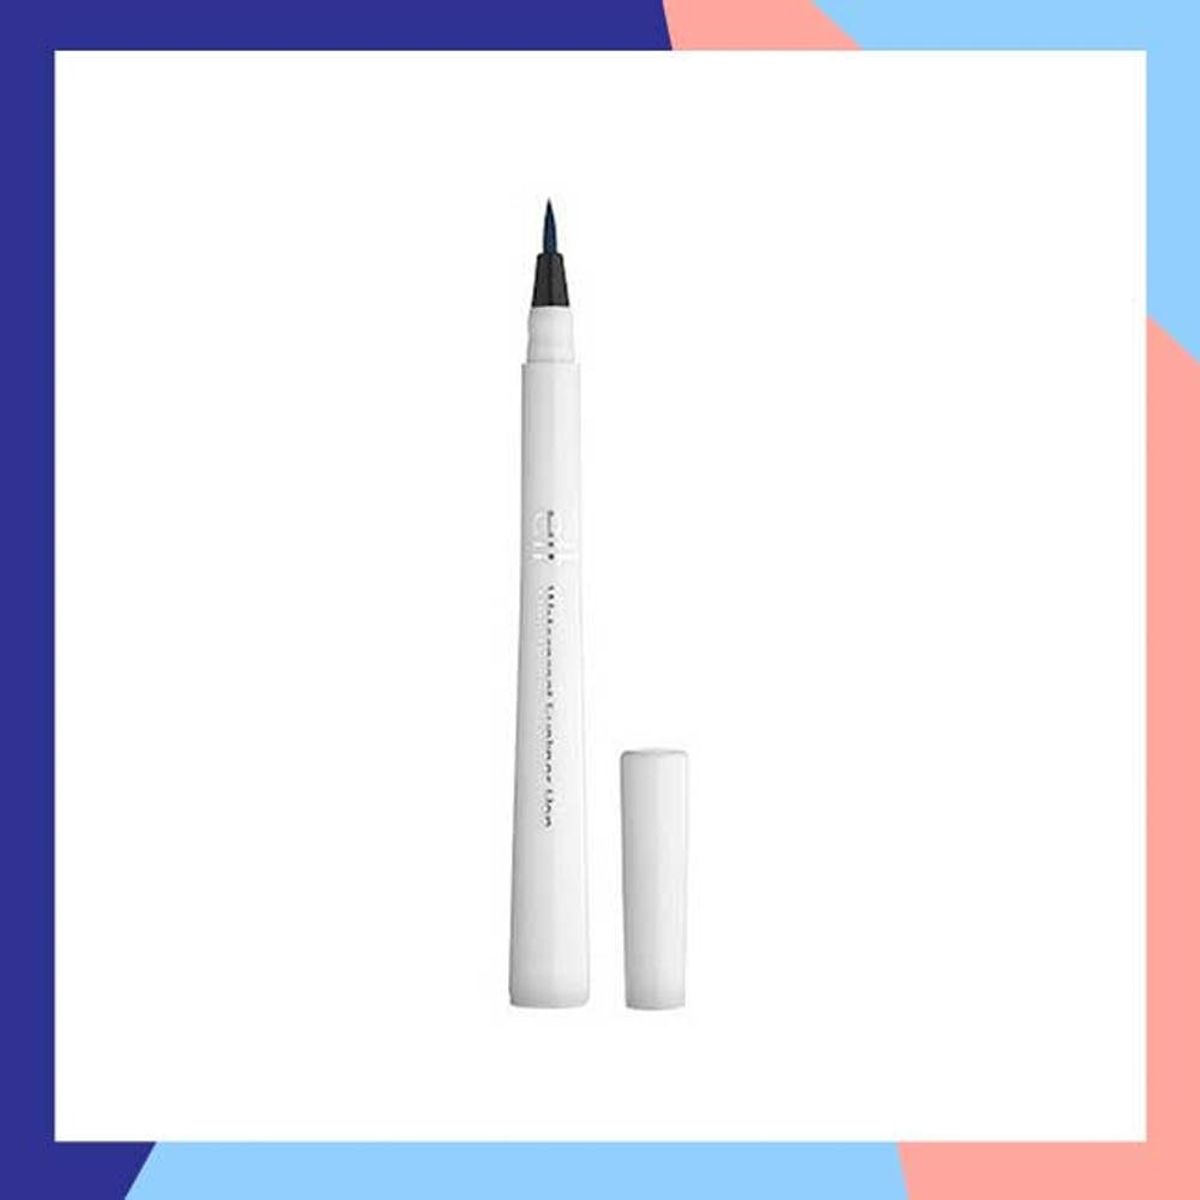 5 of the Most-Loved Eyeliners on Influenster